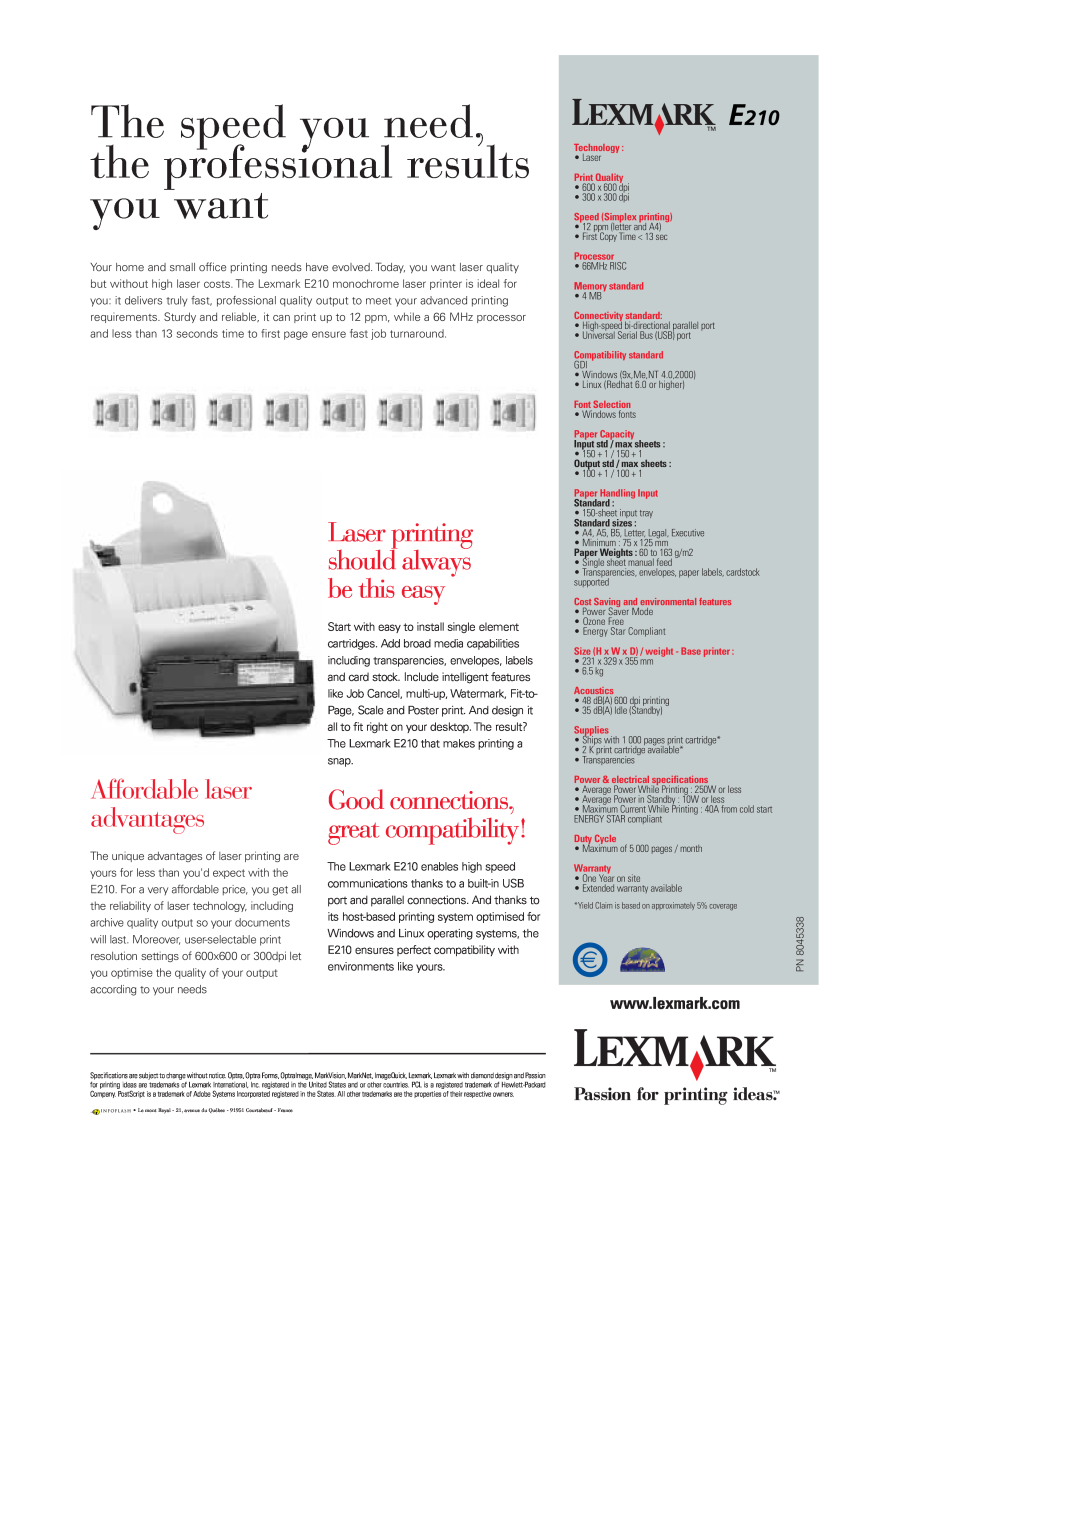 Lexmark E210 The speed you need, the professional results you want, Laser printing should always be this easy, Standard 